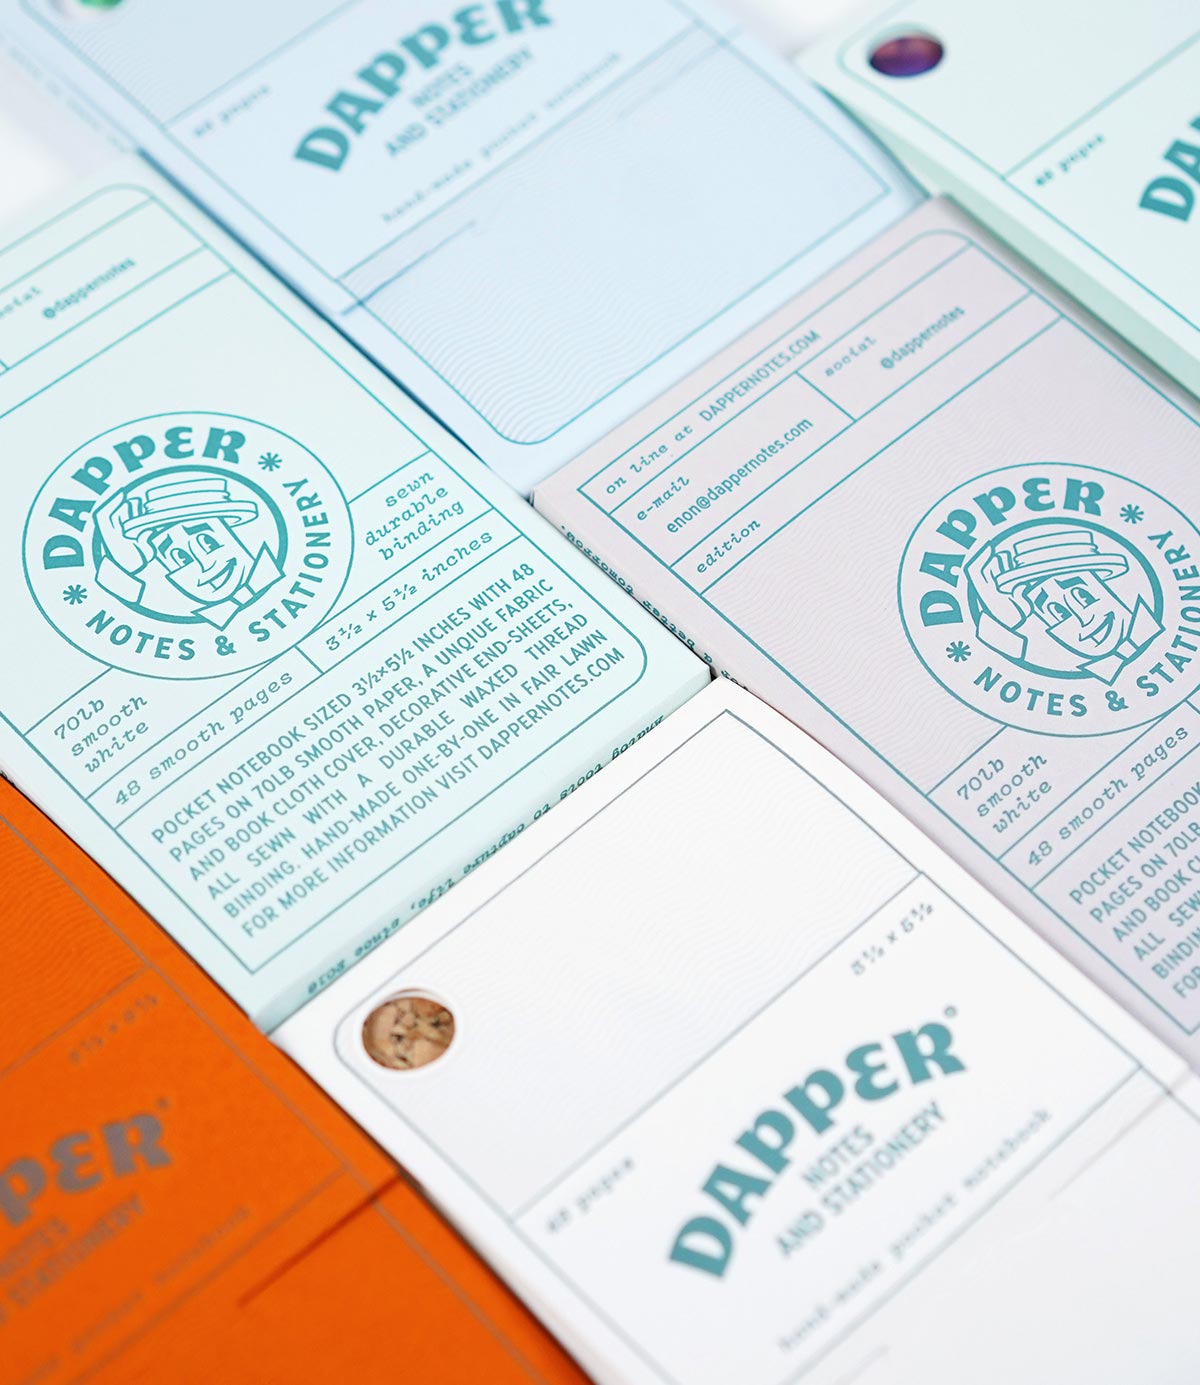 paper notebook packaging in a variety of colors. designed by enon avital, and printed by mama's sauce in etterpress for dapper notes.